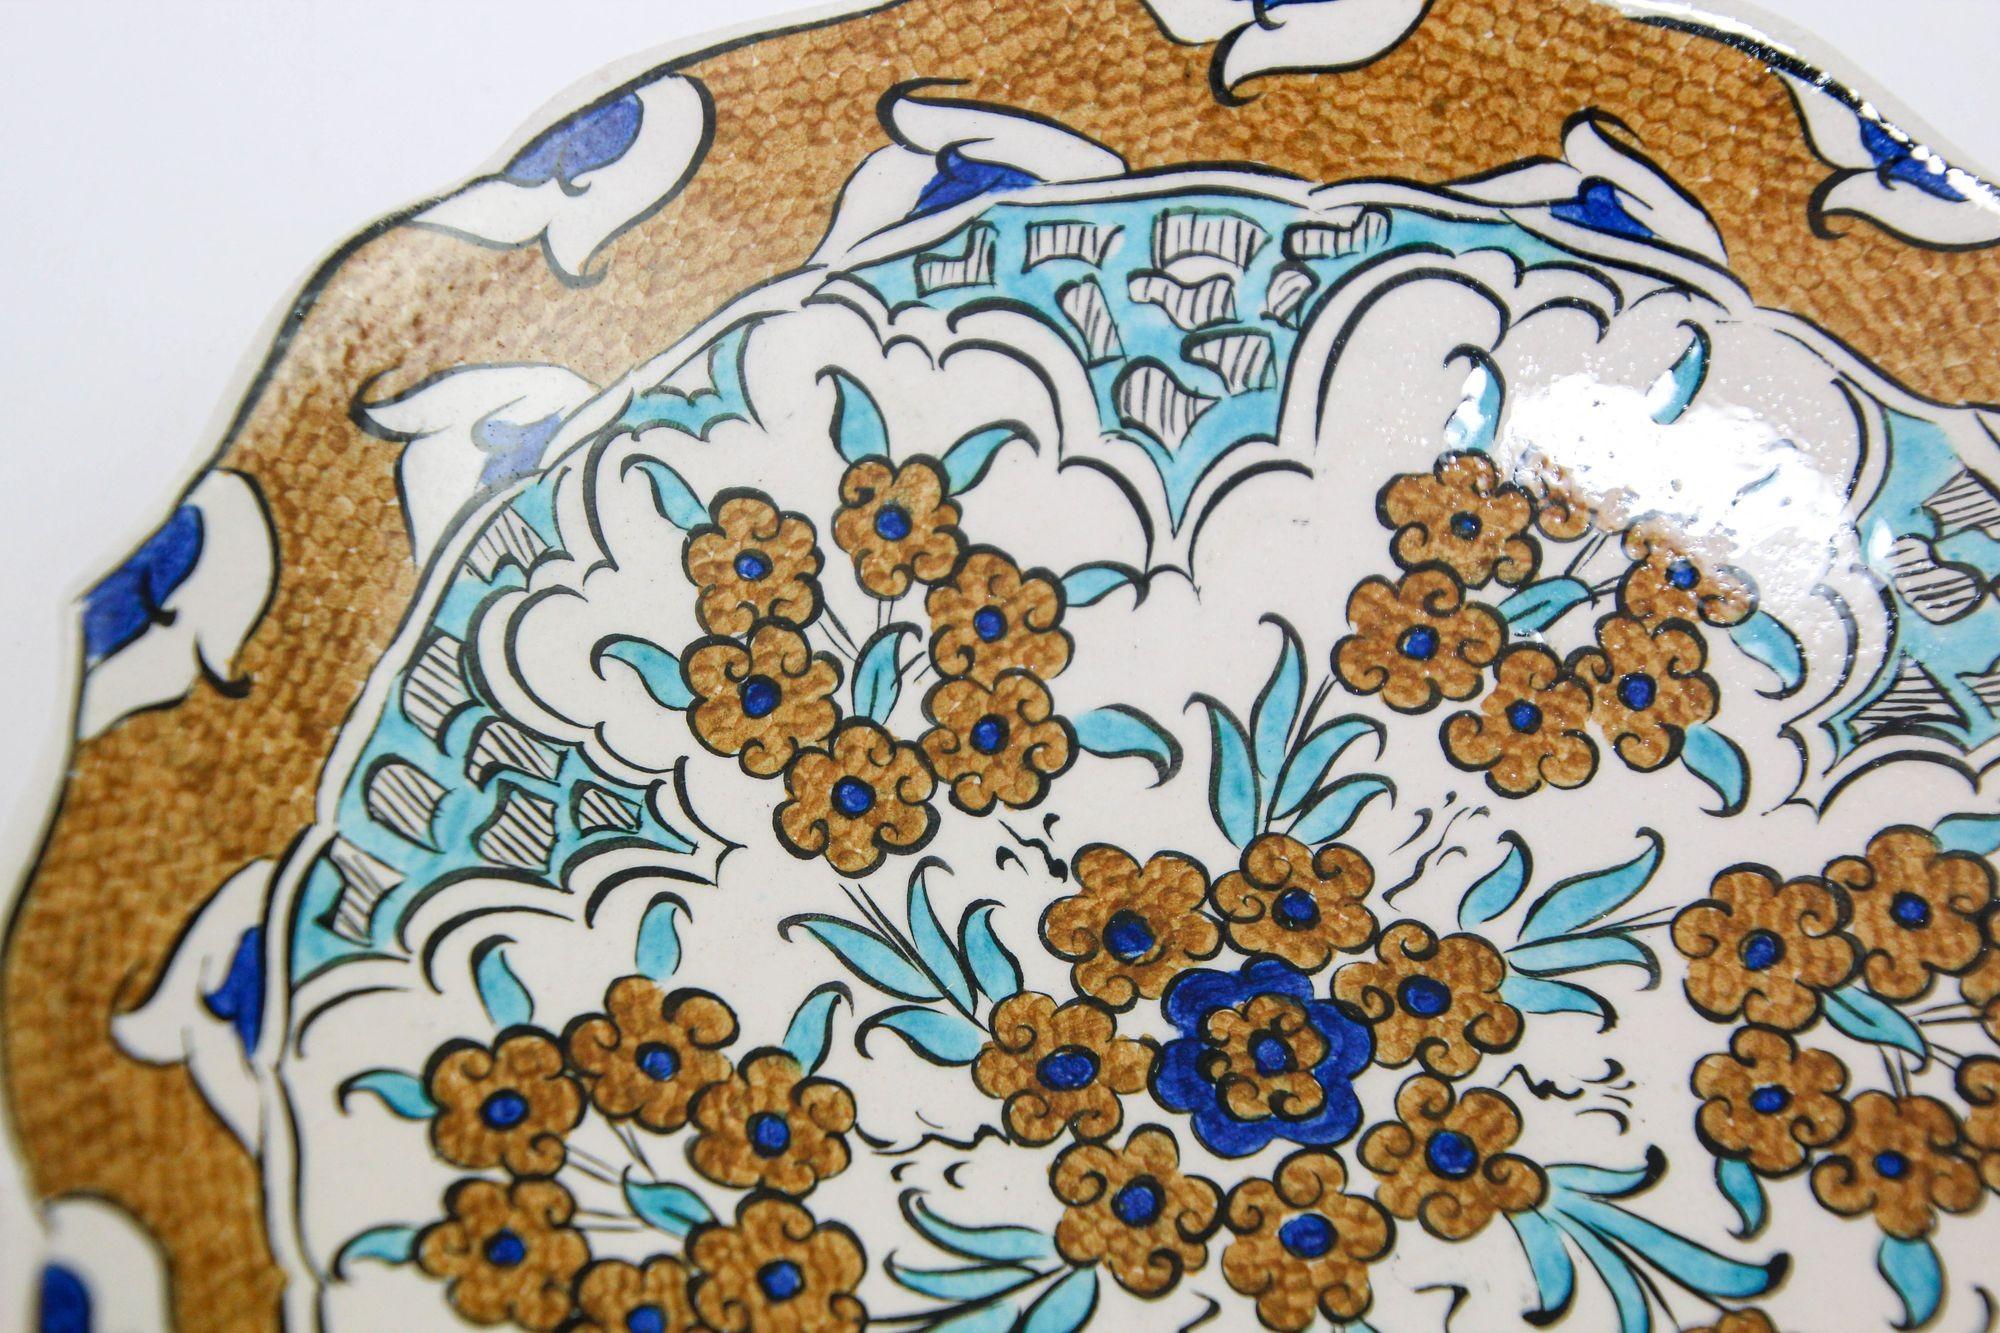 Handmade decorative wall plate, hand painted and signed by the artist.
Hand Painted small Decorative wall plate after an original Iznik 16th C. Ottoman design.
This plate is hand painted with an intricate design with floral and foliages in teal,